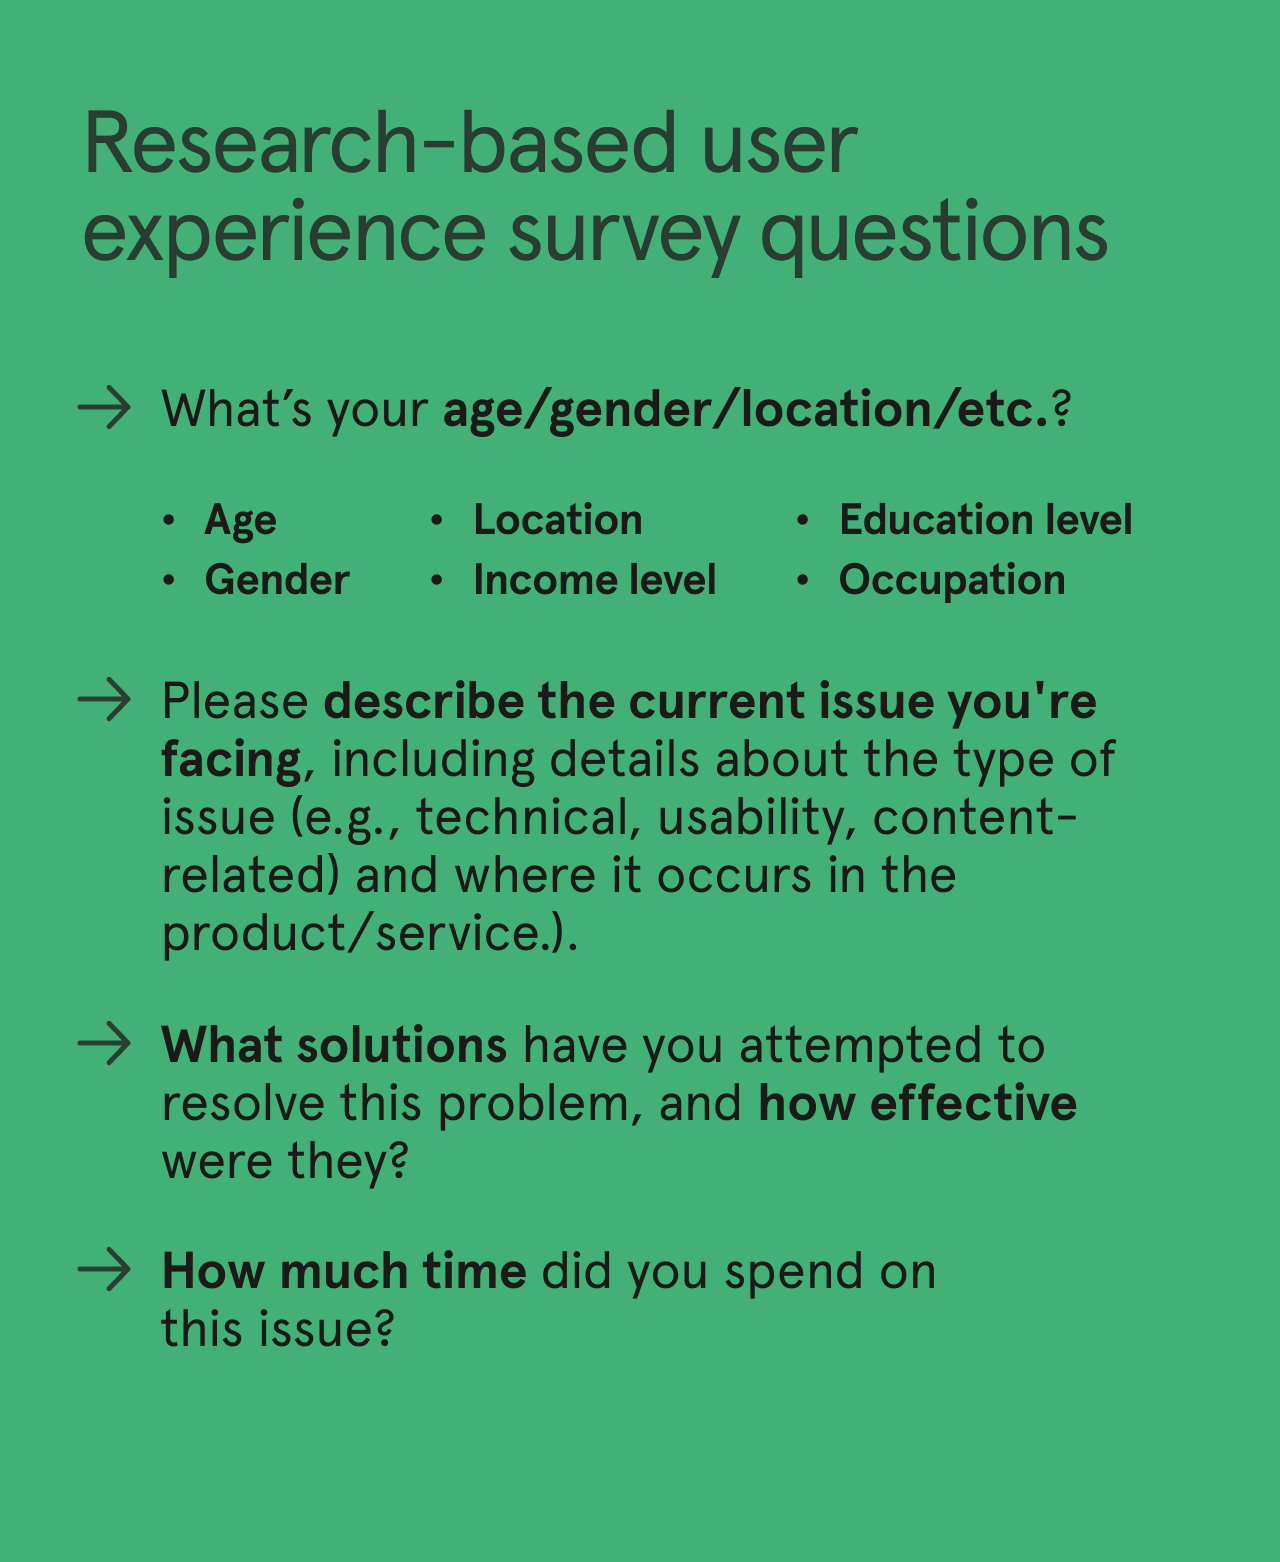 List of research-based user experience survey questions.